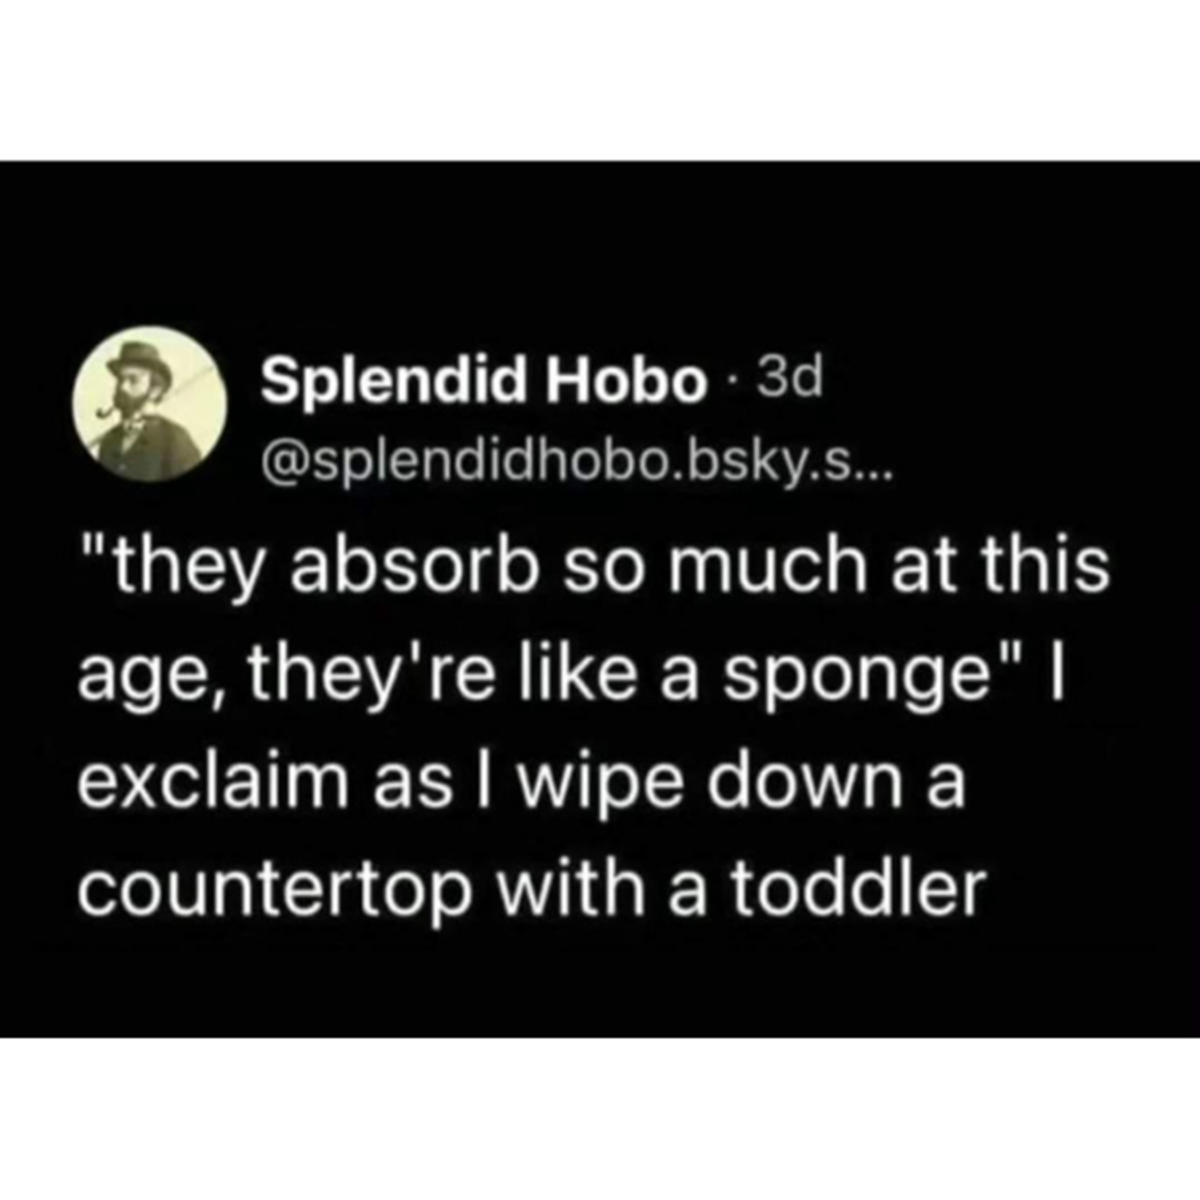 screenshot - Splendid Hobo 3d .bsky.s... "they absorb so much at this age, they're a sponge" I exclaim as I wipe down a countertop with a toddler